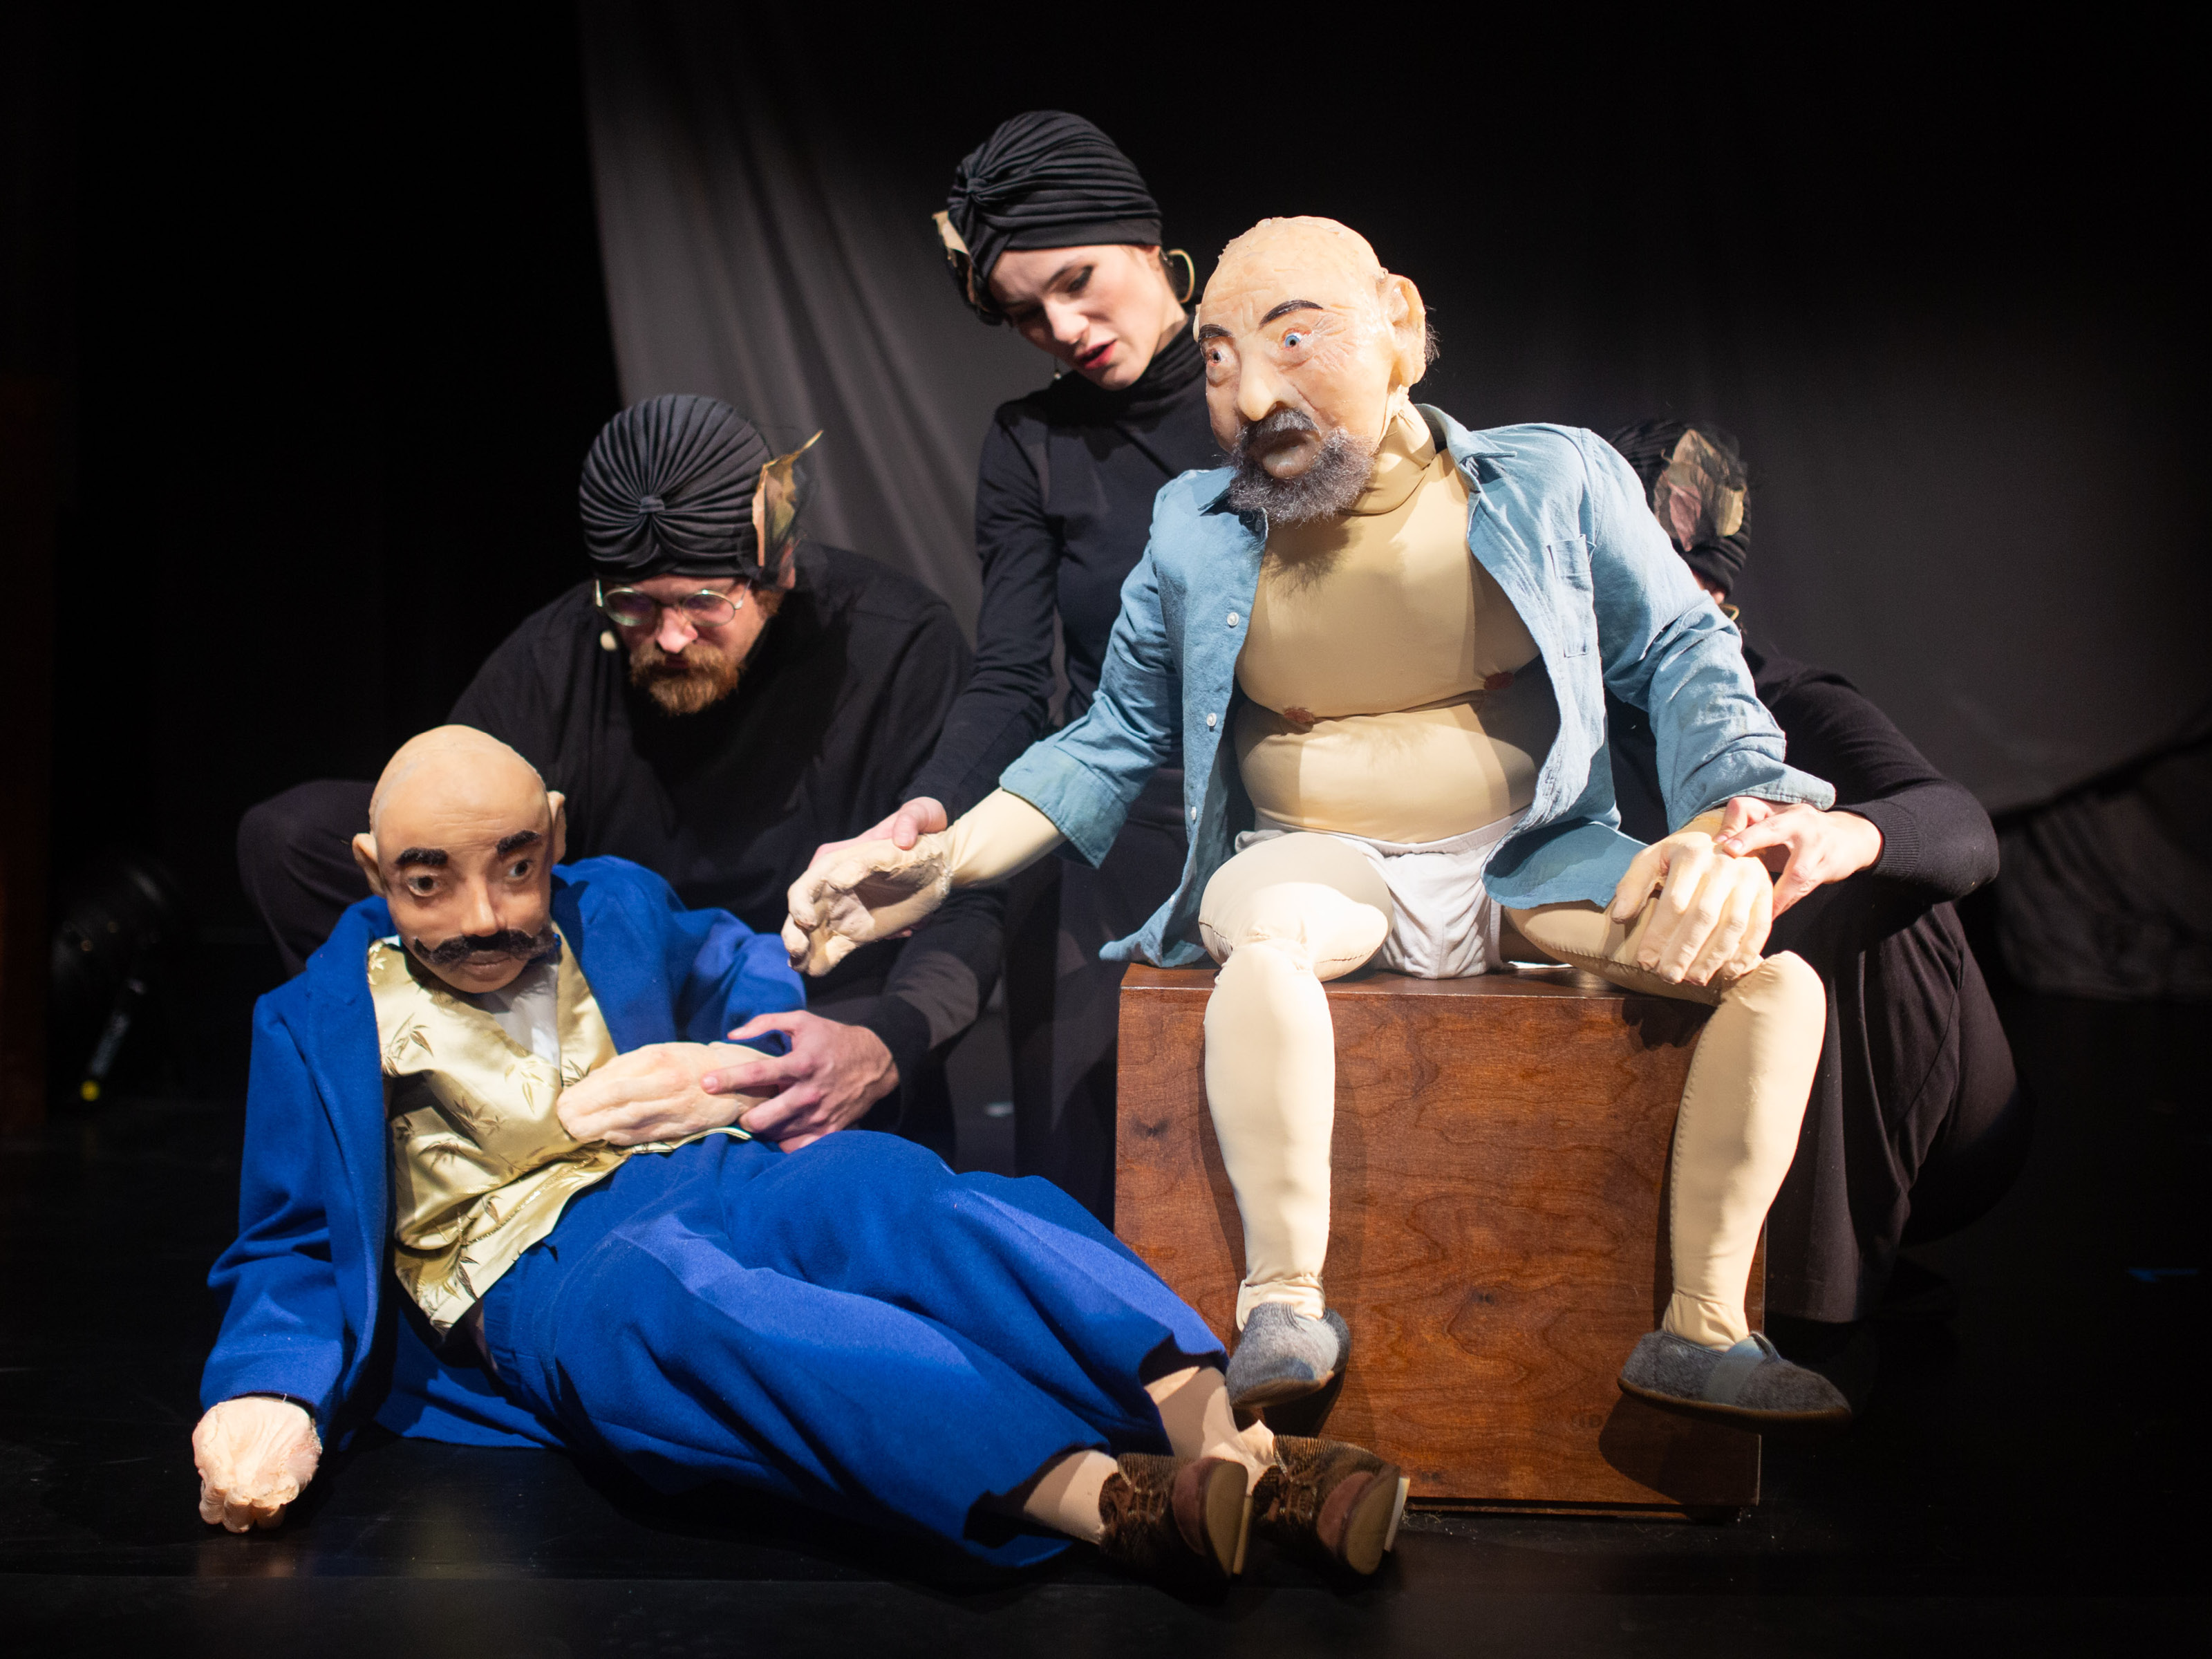 The puppet of Prince Sternenhoch is dressed in high quality blue suit and golden vest next to the puppet of an older man with buttoned shirt and white underpants. Behind them are the puppeteers in black clothes with black hoods.